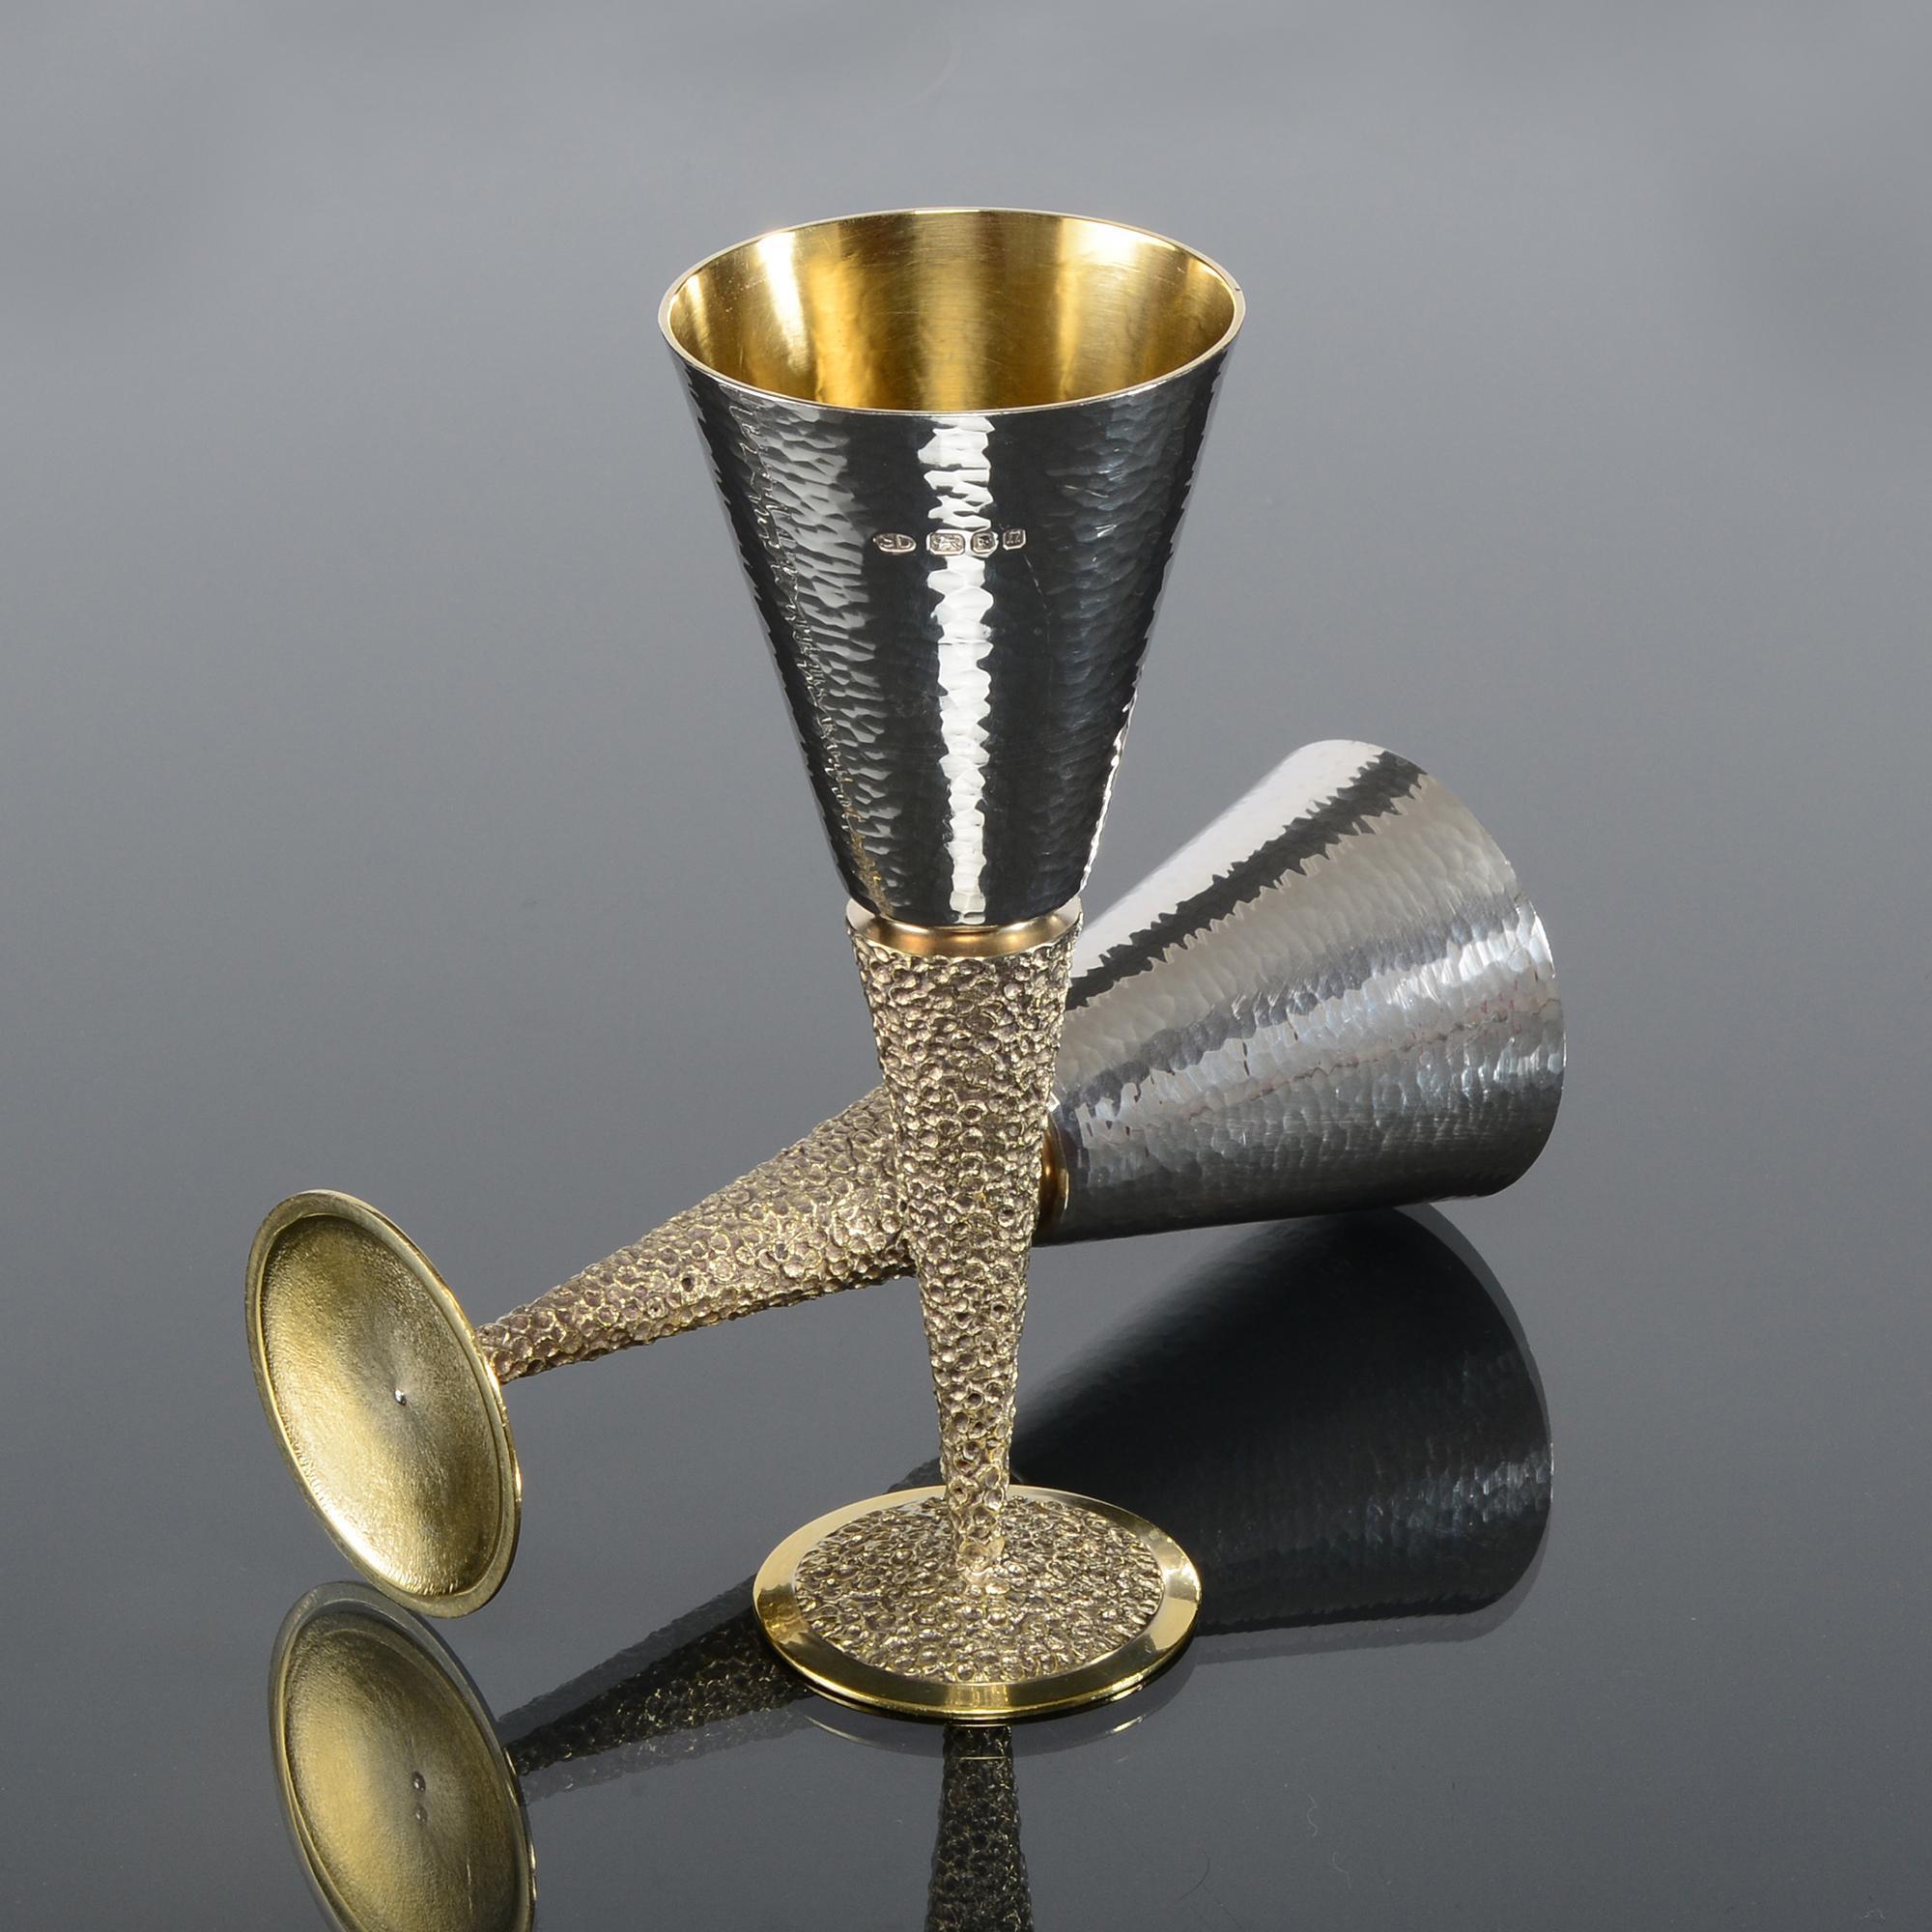 Set stylish mid-century Champagne flutes with tapering cone-shaped stems and circular bases decorated in a mottled pattern and gilded.  The hand-hammered bowls also have gilded interiors to create a most attractive and elegant appearance.  This is a